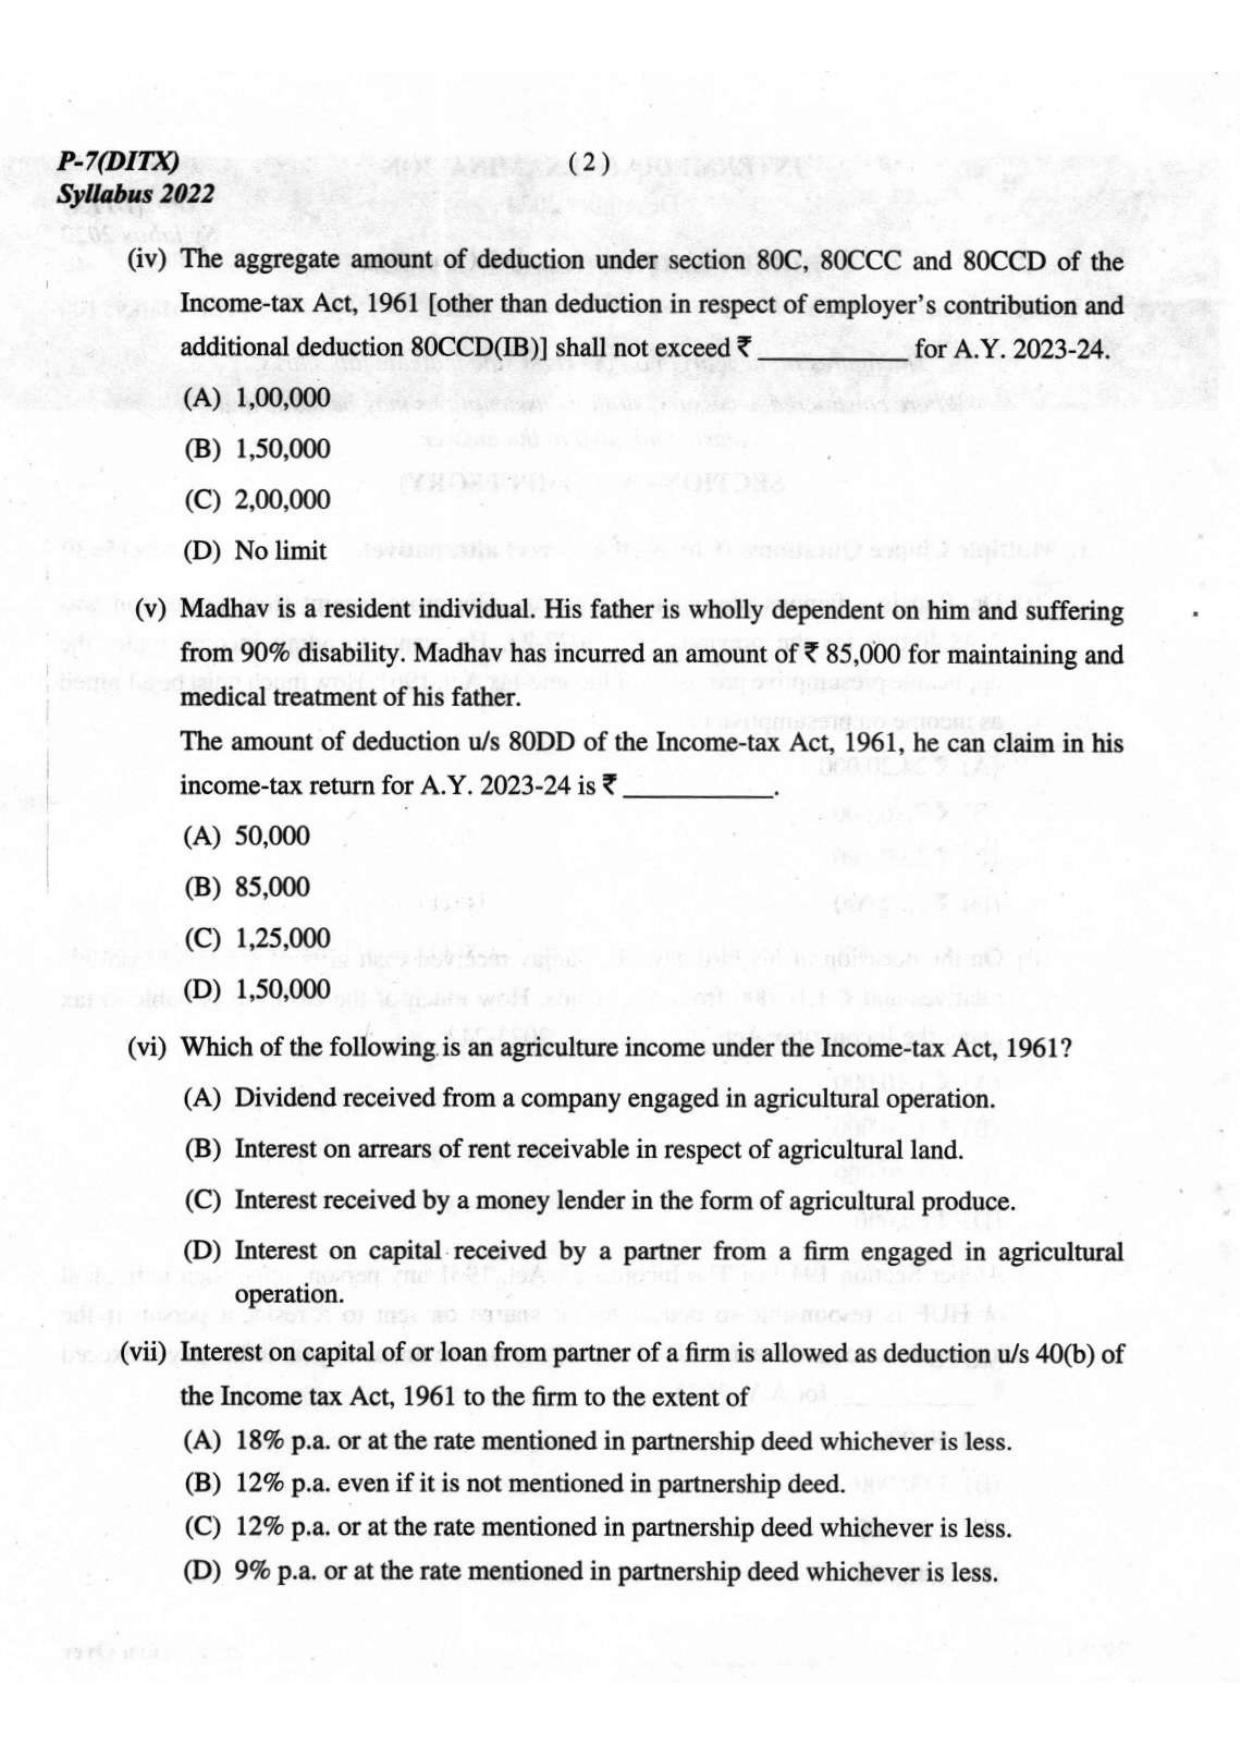 ICMAI Intermediate December 2023 Question Paper - Direct And Indirect Taxation - Page 2